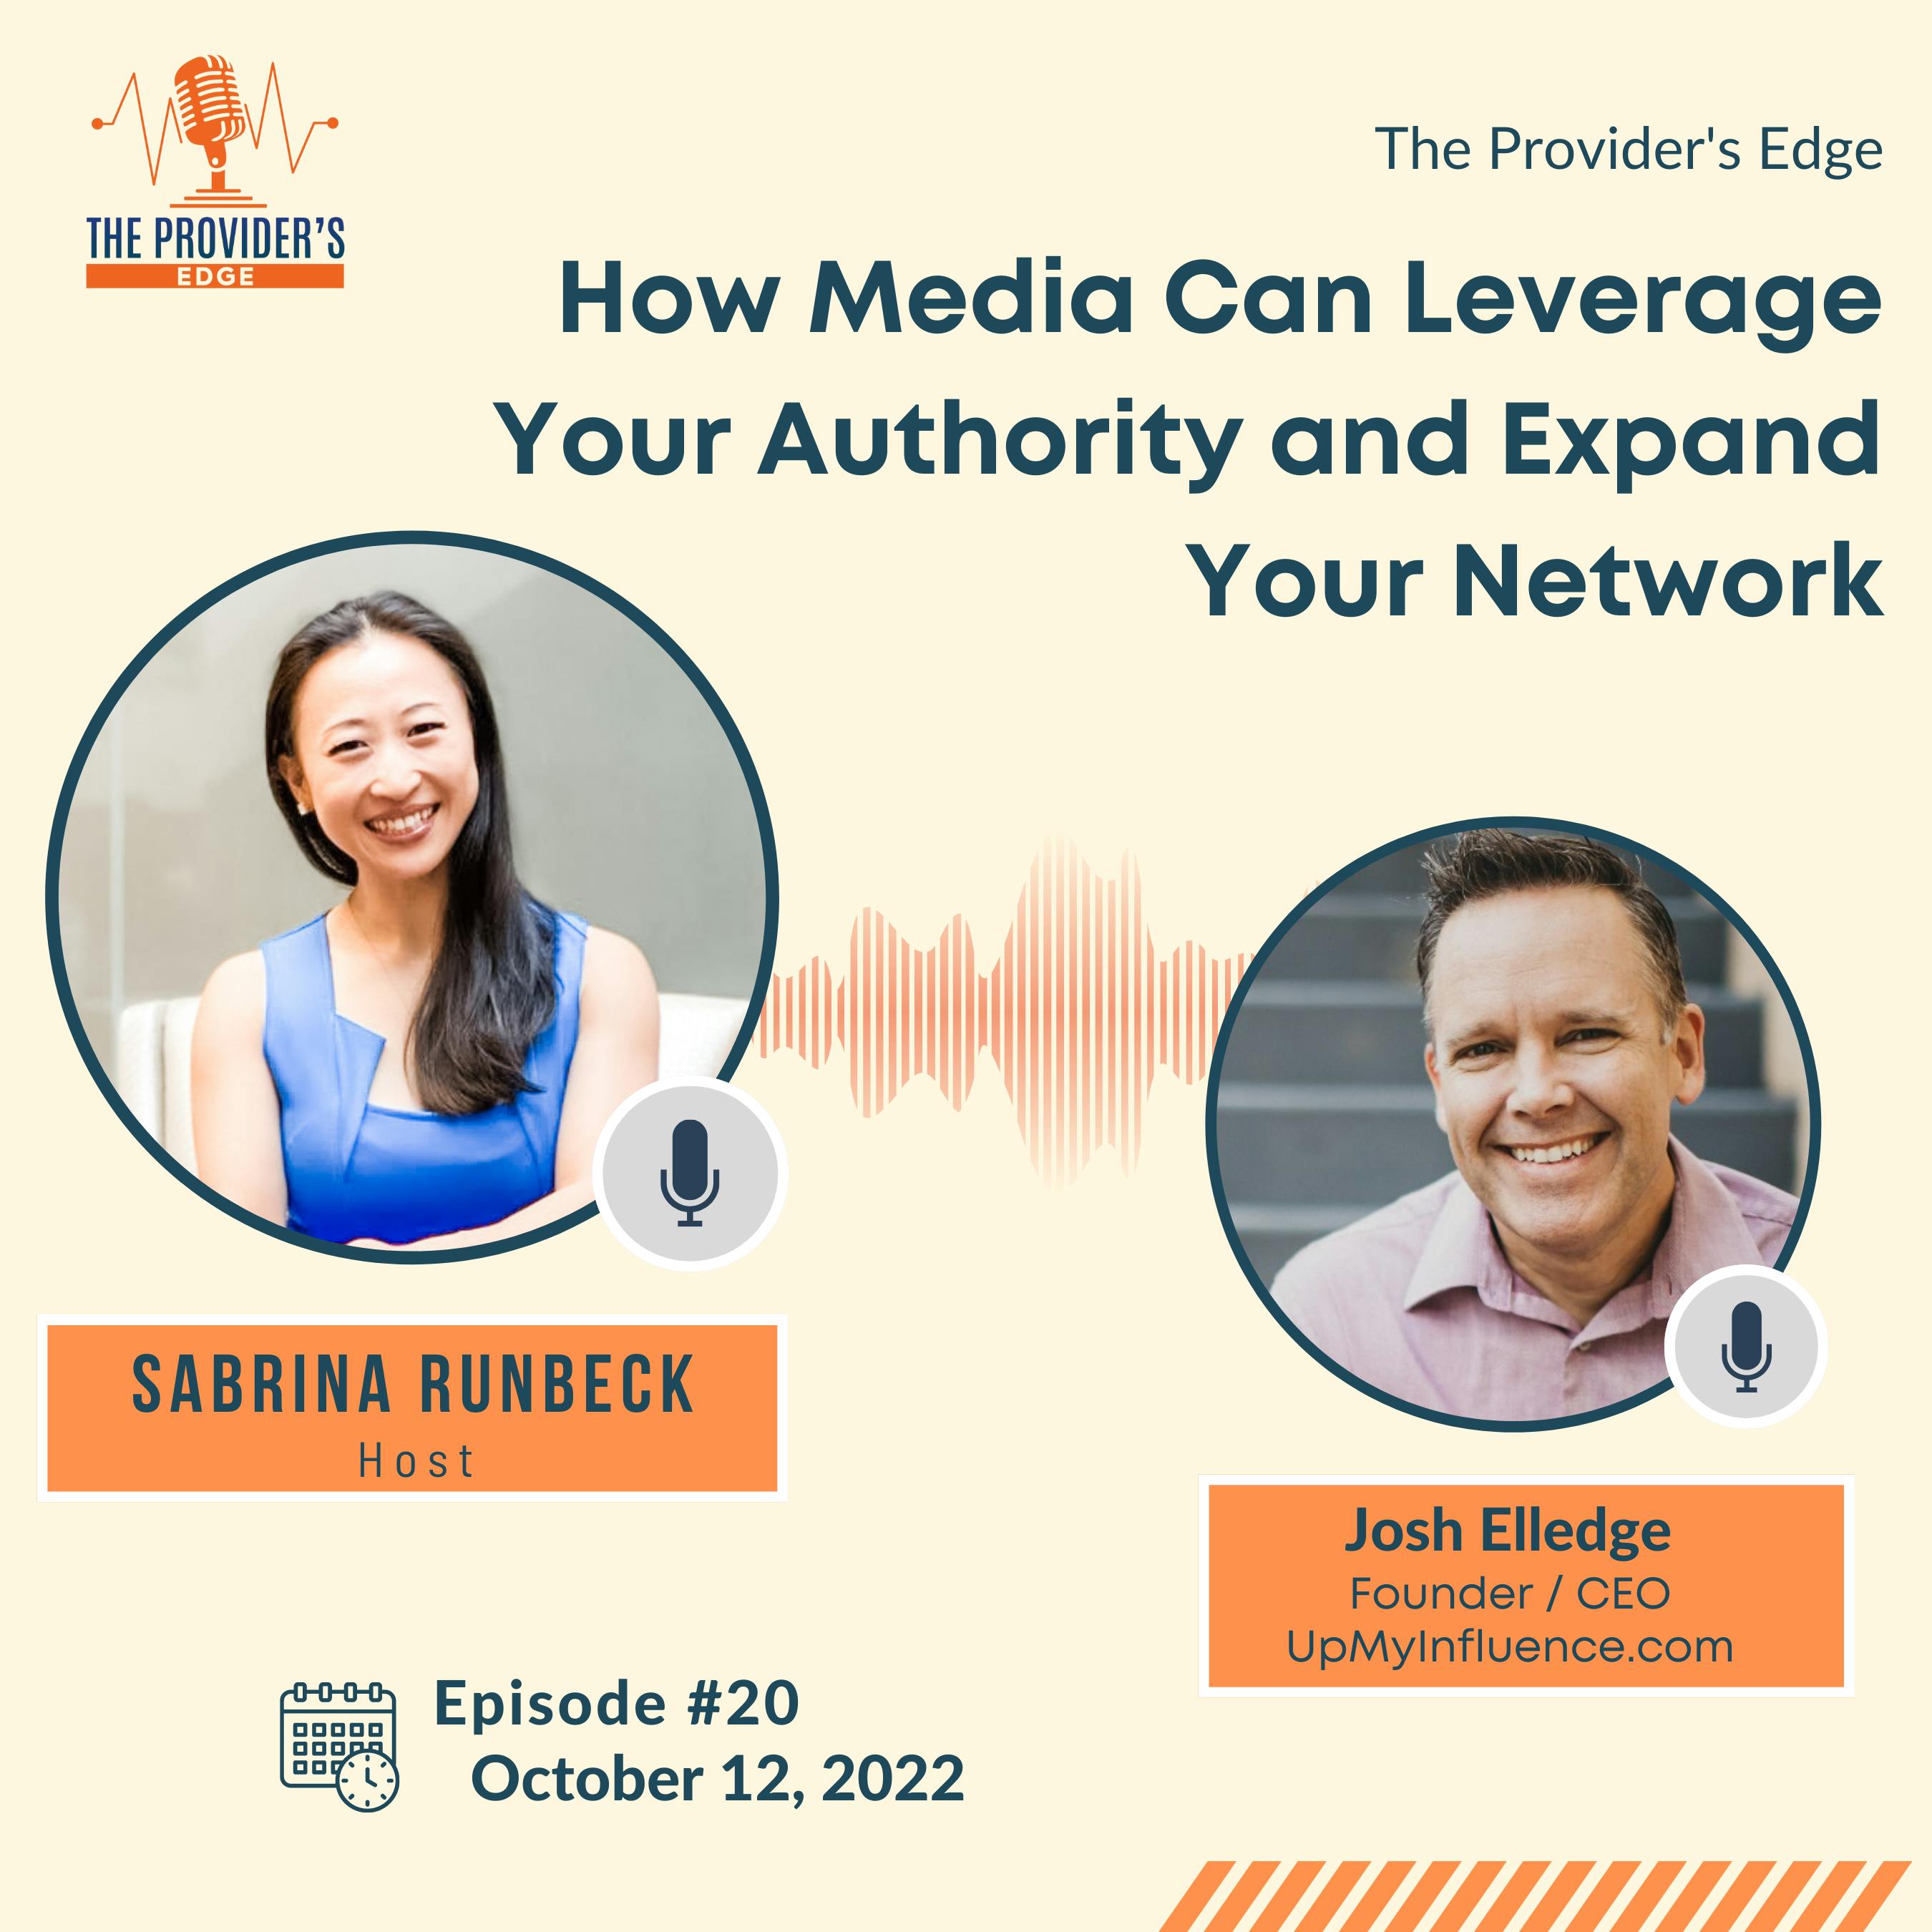 How media can leverage your authority and expand your network with Josh Elledge, Ep 20